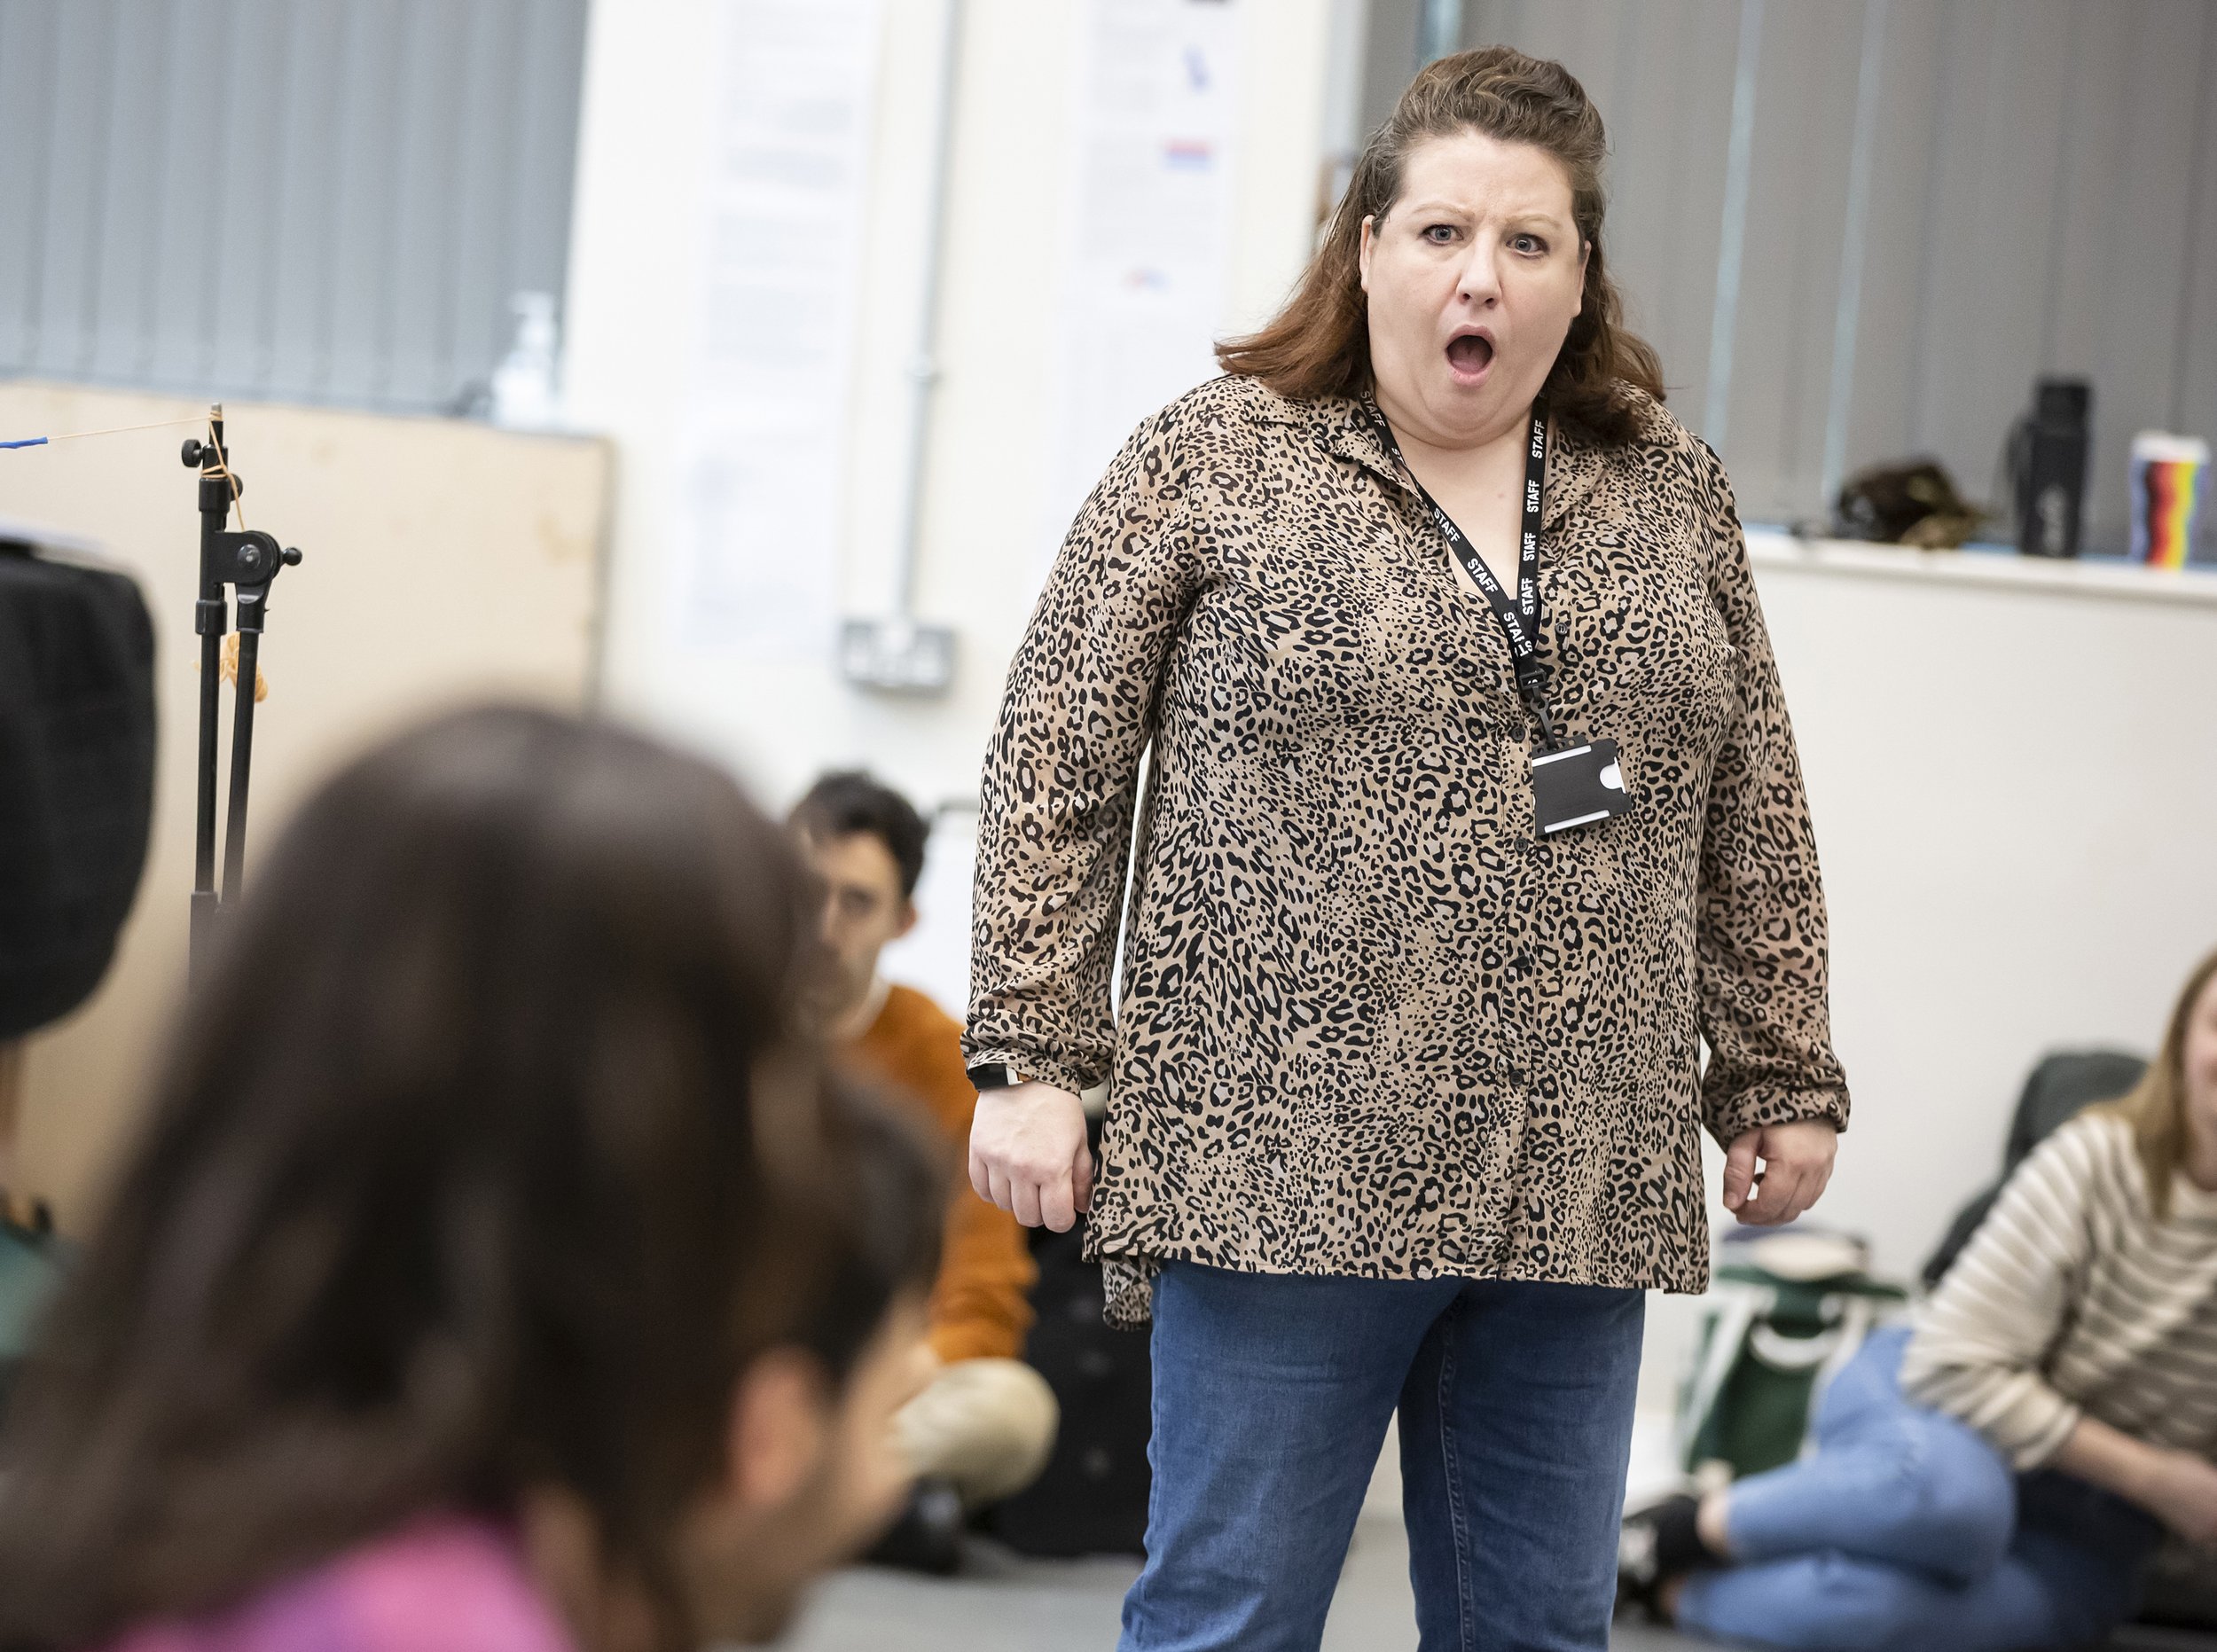 019_The Importance of Being Earnest Rehearsals_Pamela Raith Photography.jpg